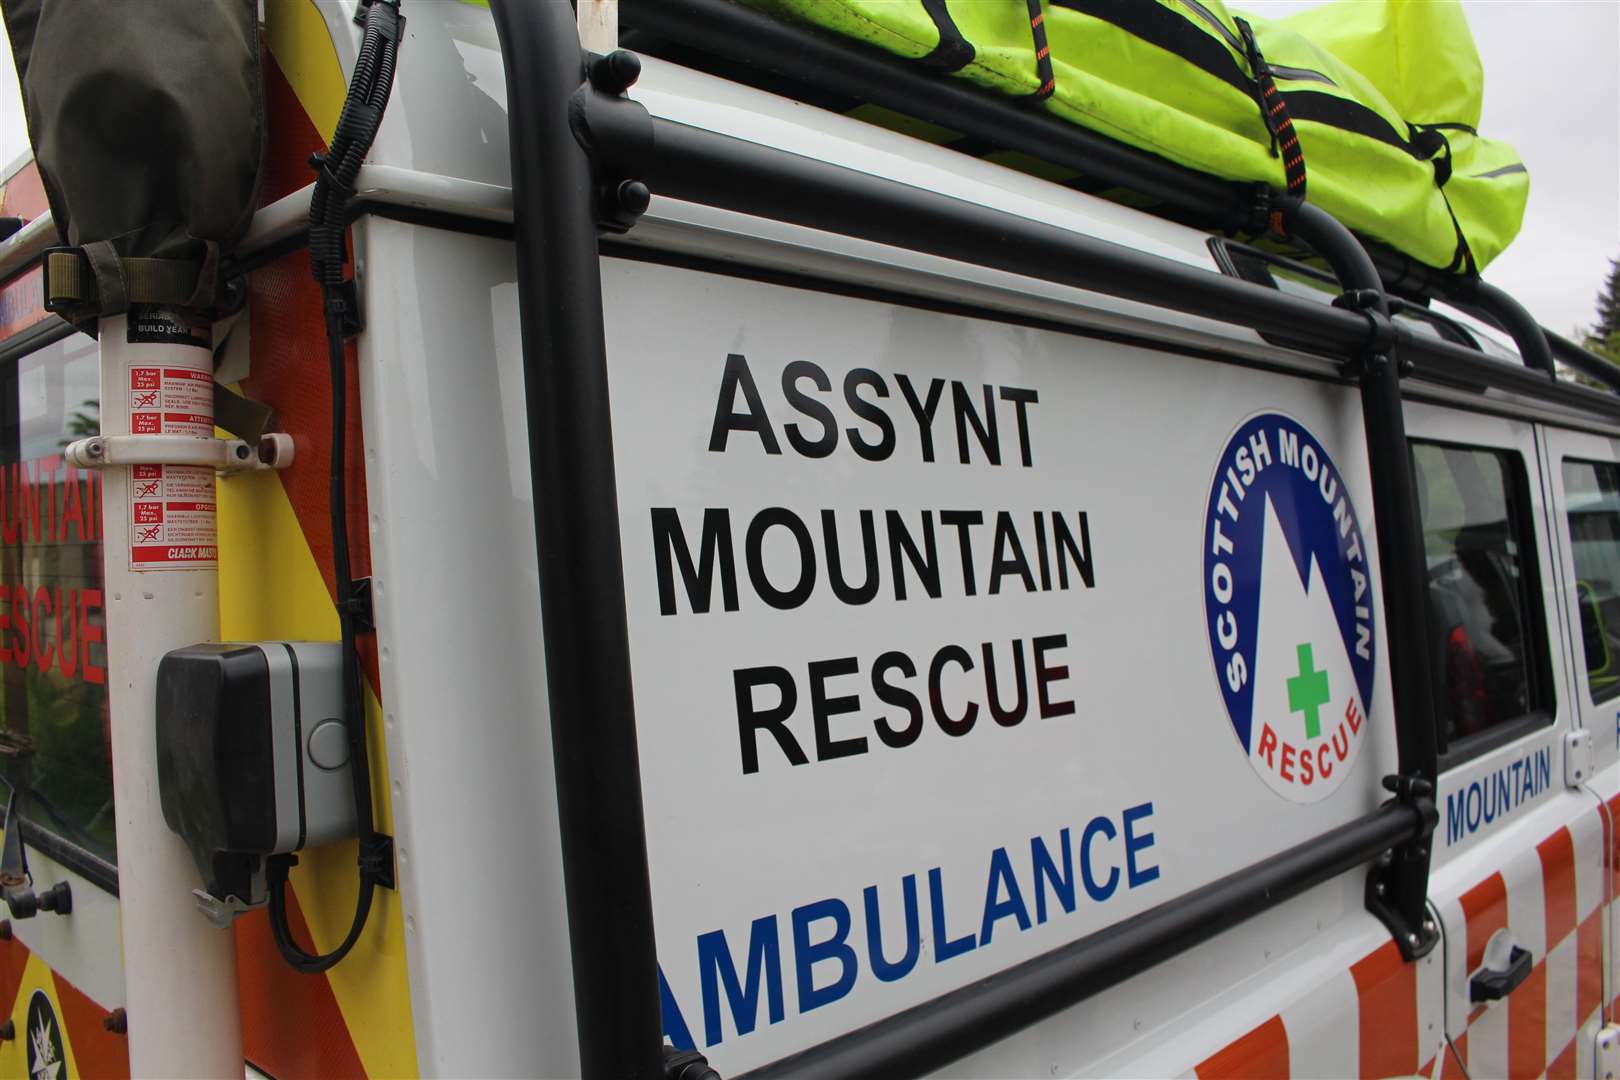 Assynt Mountain Rescue Team relies on public support.